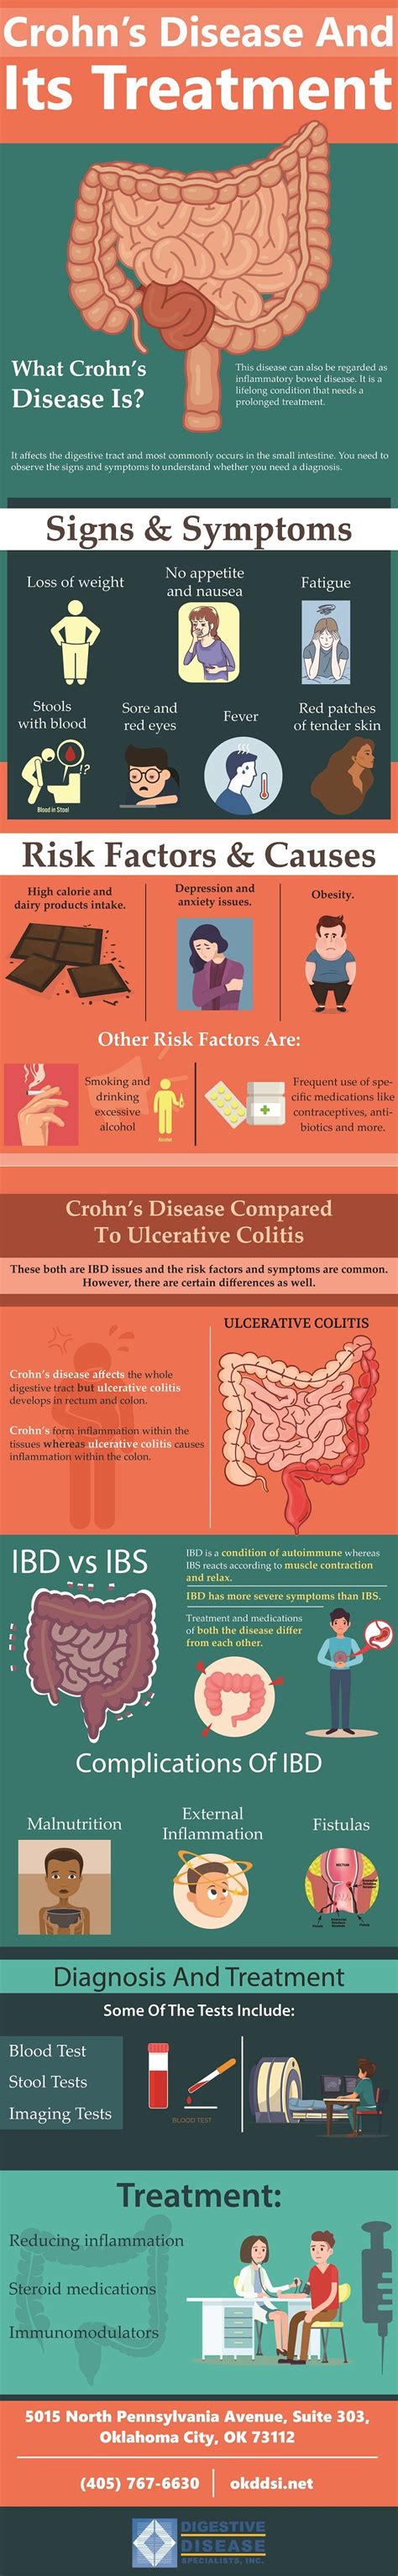 Crohns Disease And Its Treatment